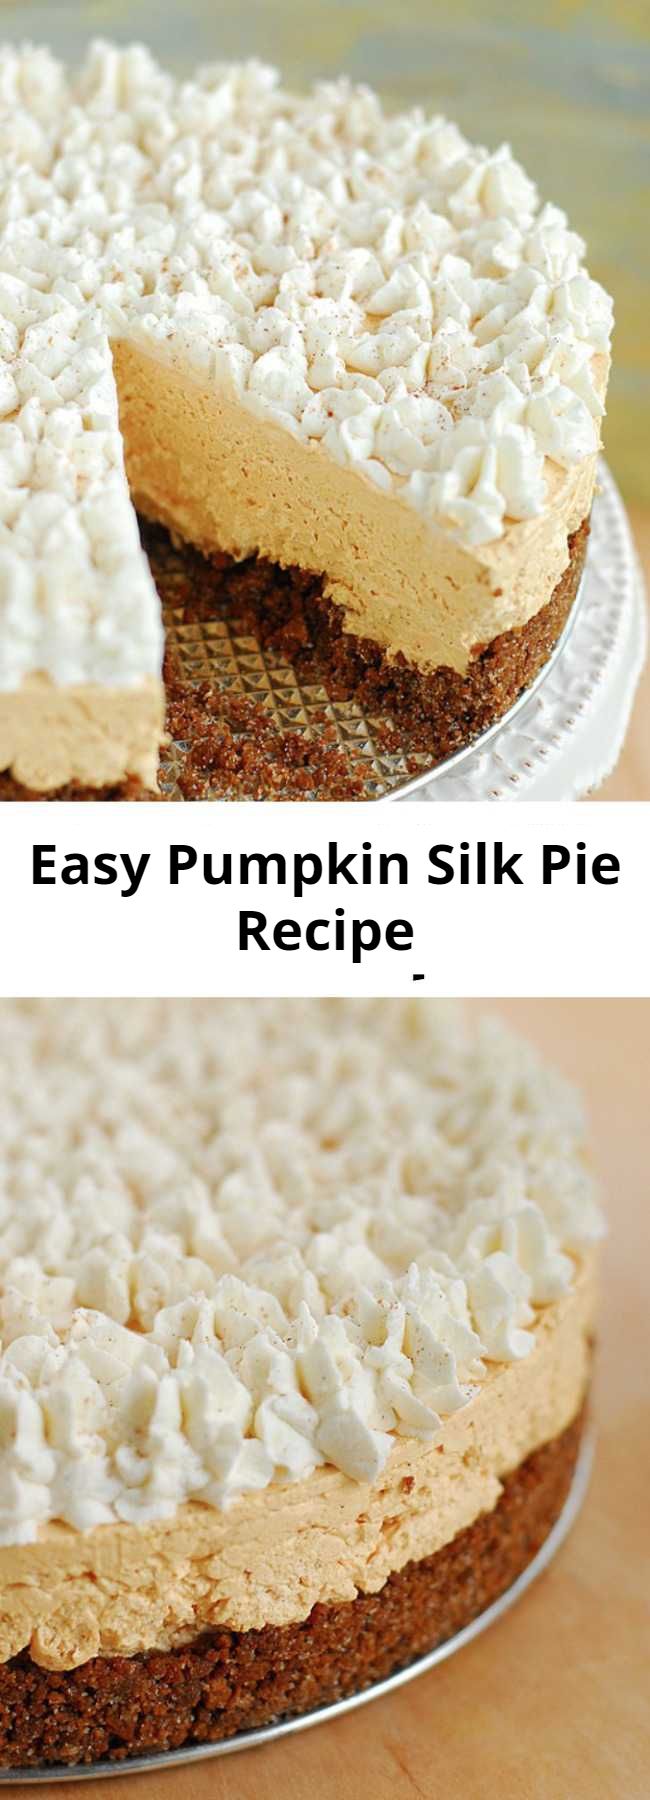 Easy Pumpkin Silk Pie Recipe - This Pumpkin Silk Pie is a delicious holiday dessert recipe that is easy to make. Pumpkin dessert recipes are perfect for holiday parties and this pie is a fun alternative to the traditional pumpkin pie.